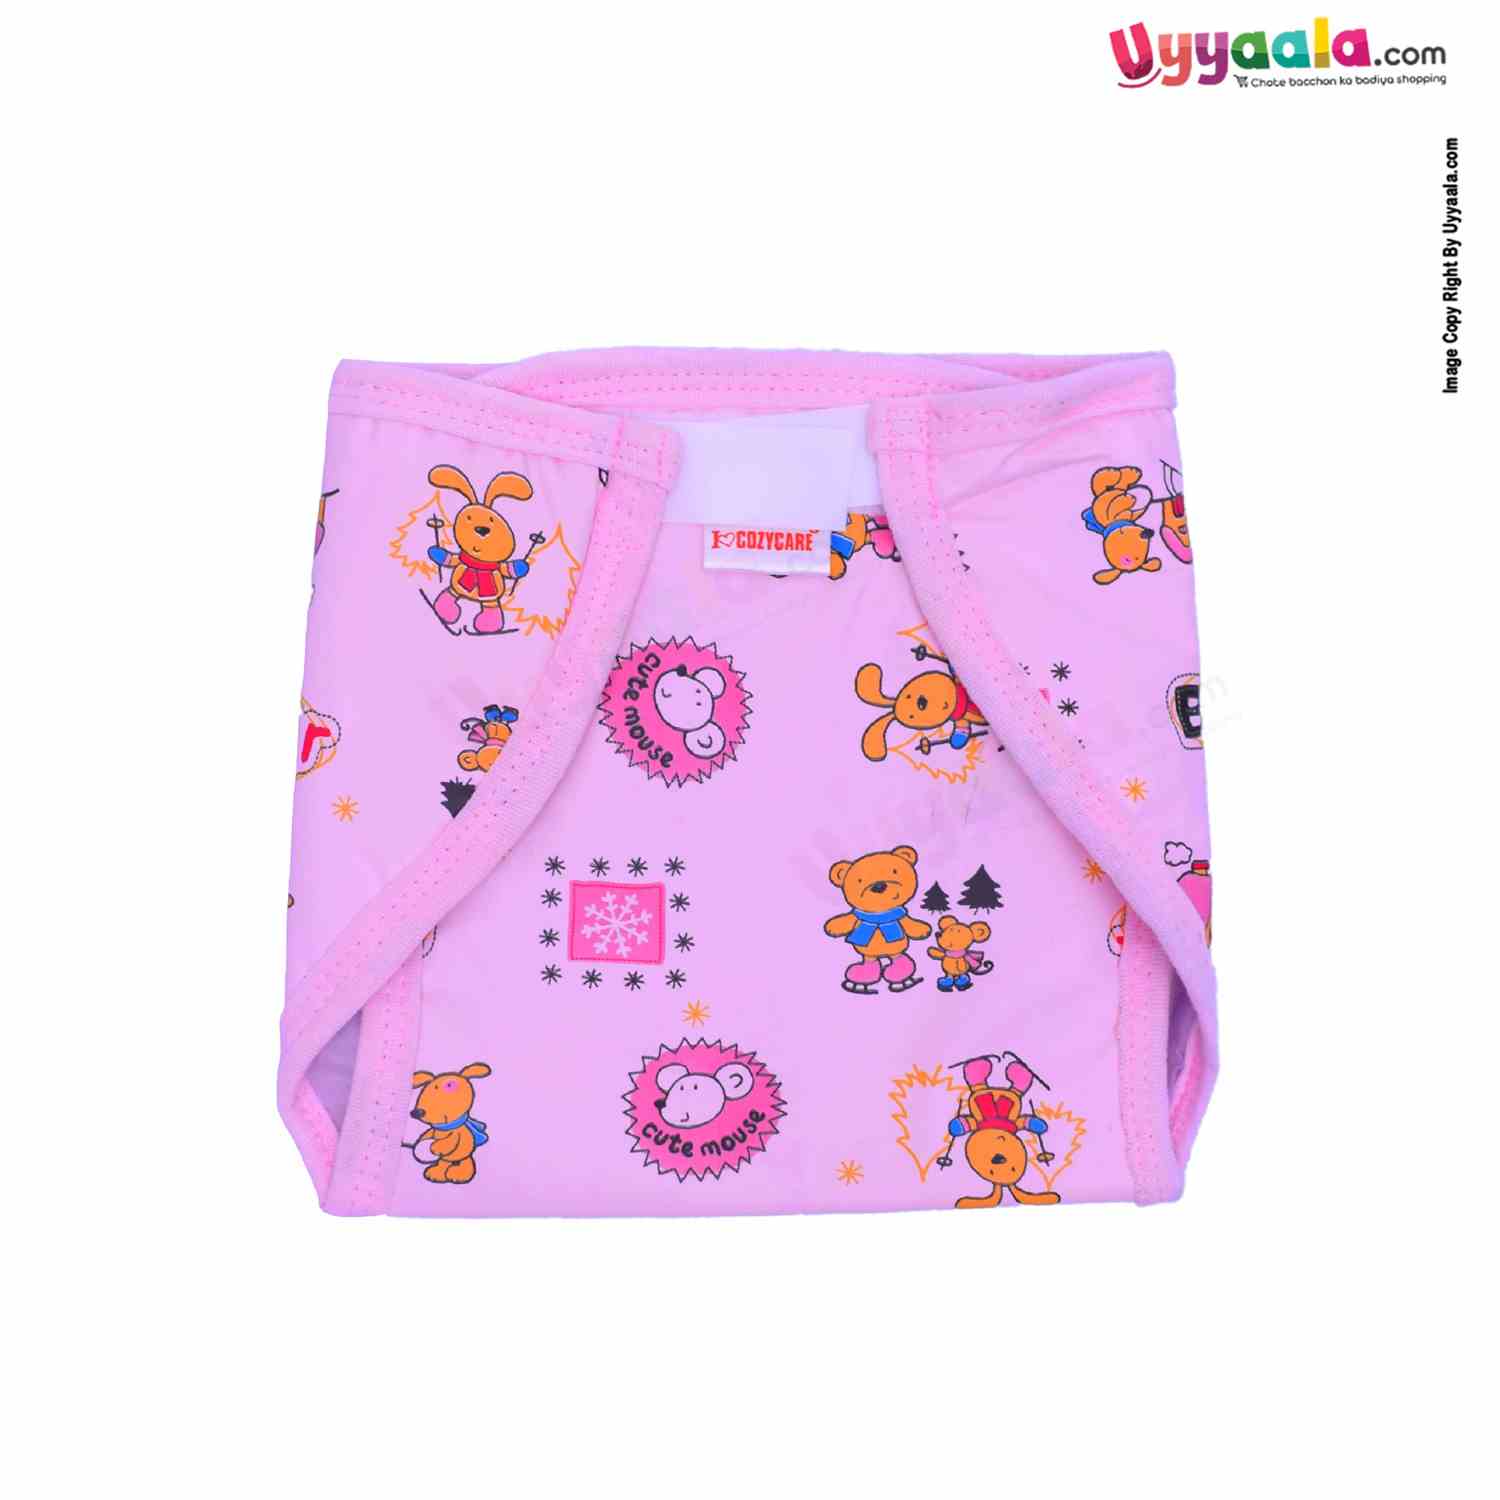 COZYCARE Washable Diapers Plastic, Velcro Bear Print Pink, Blue & Yellow without Pads- 3P Set (S)